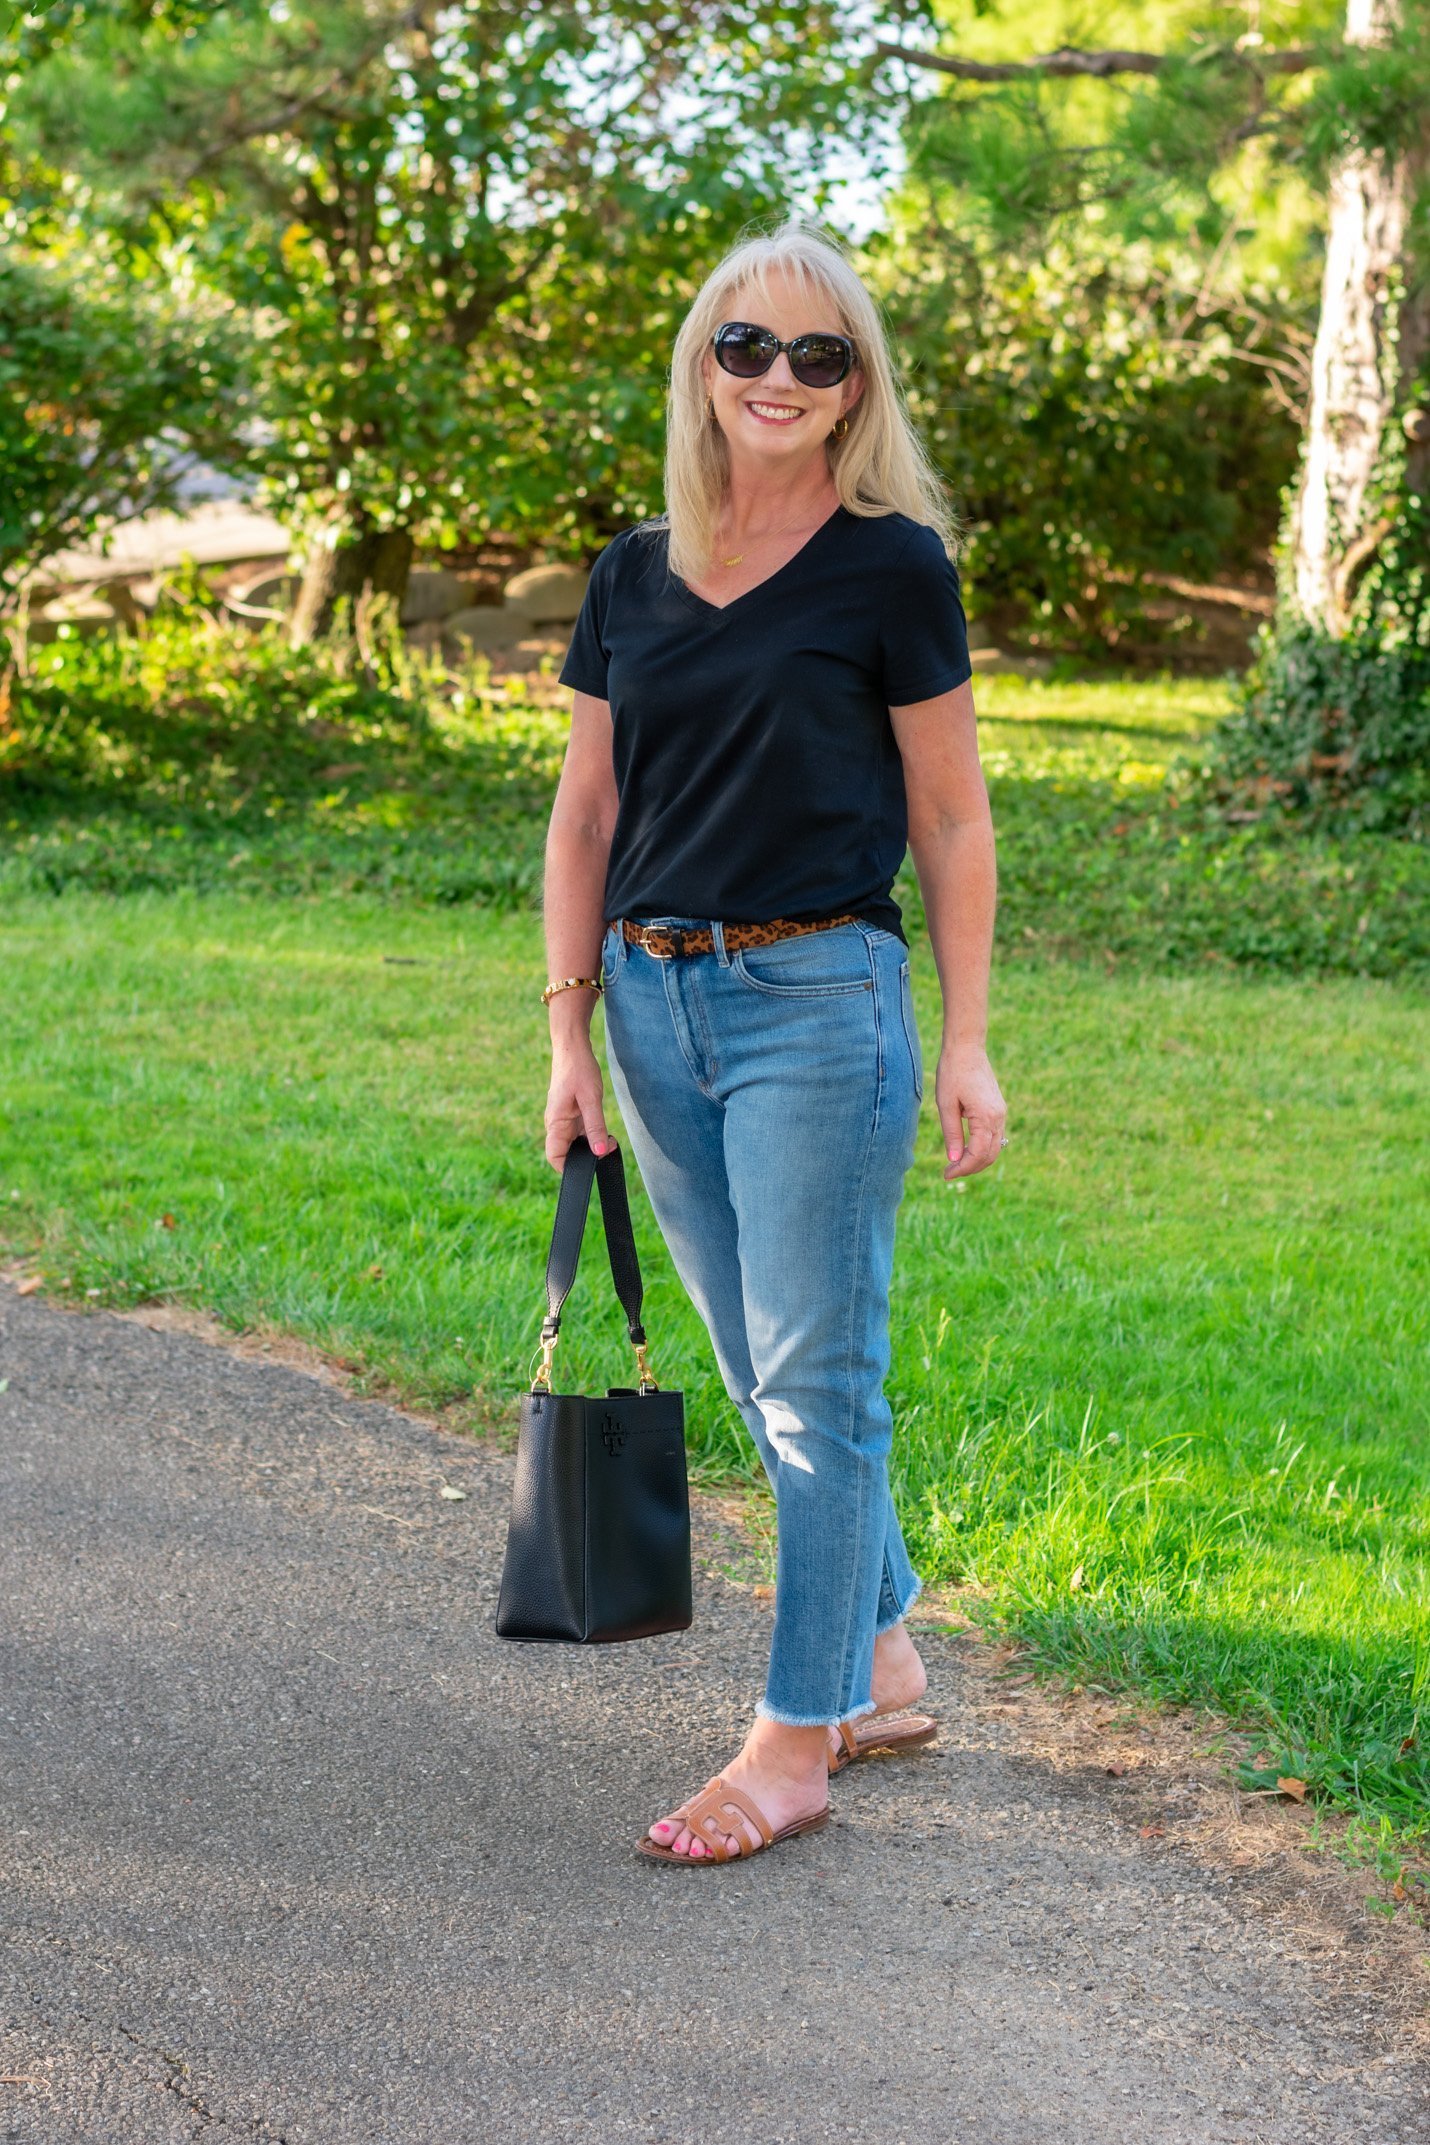 Transition Into Fall with a Black Tee and Blue Jeans - Dressed for My Day